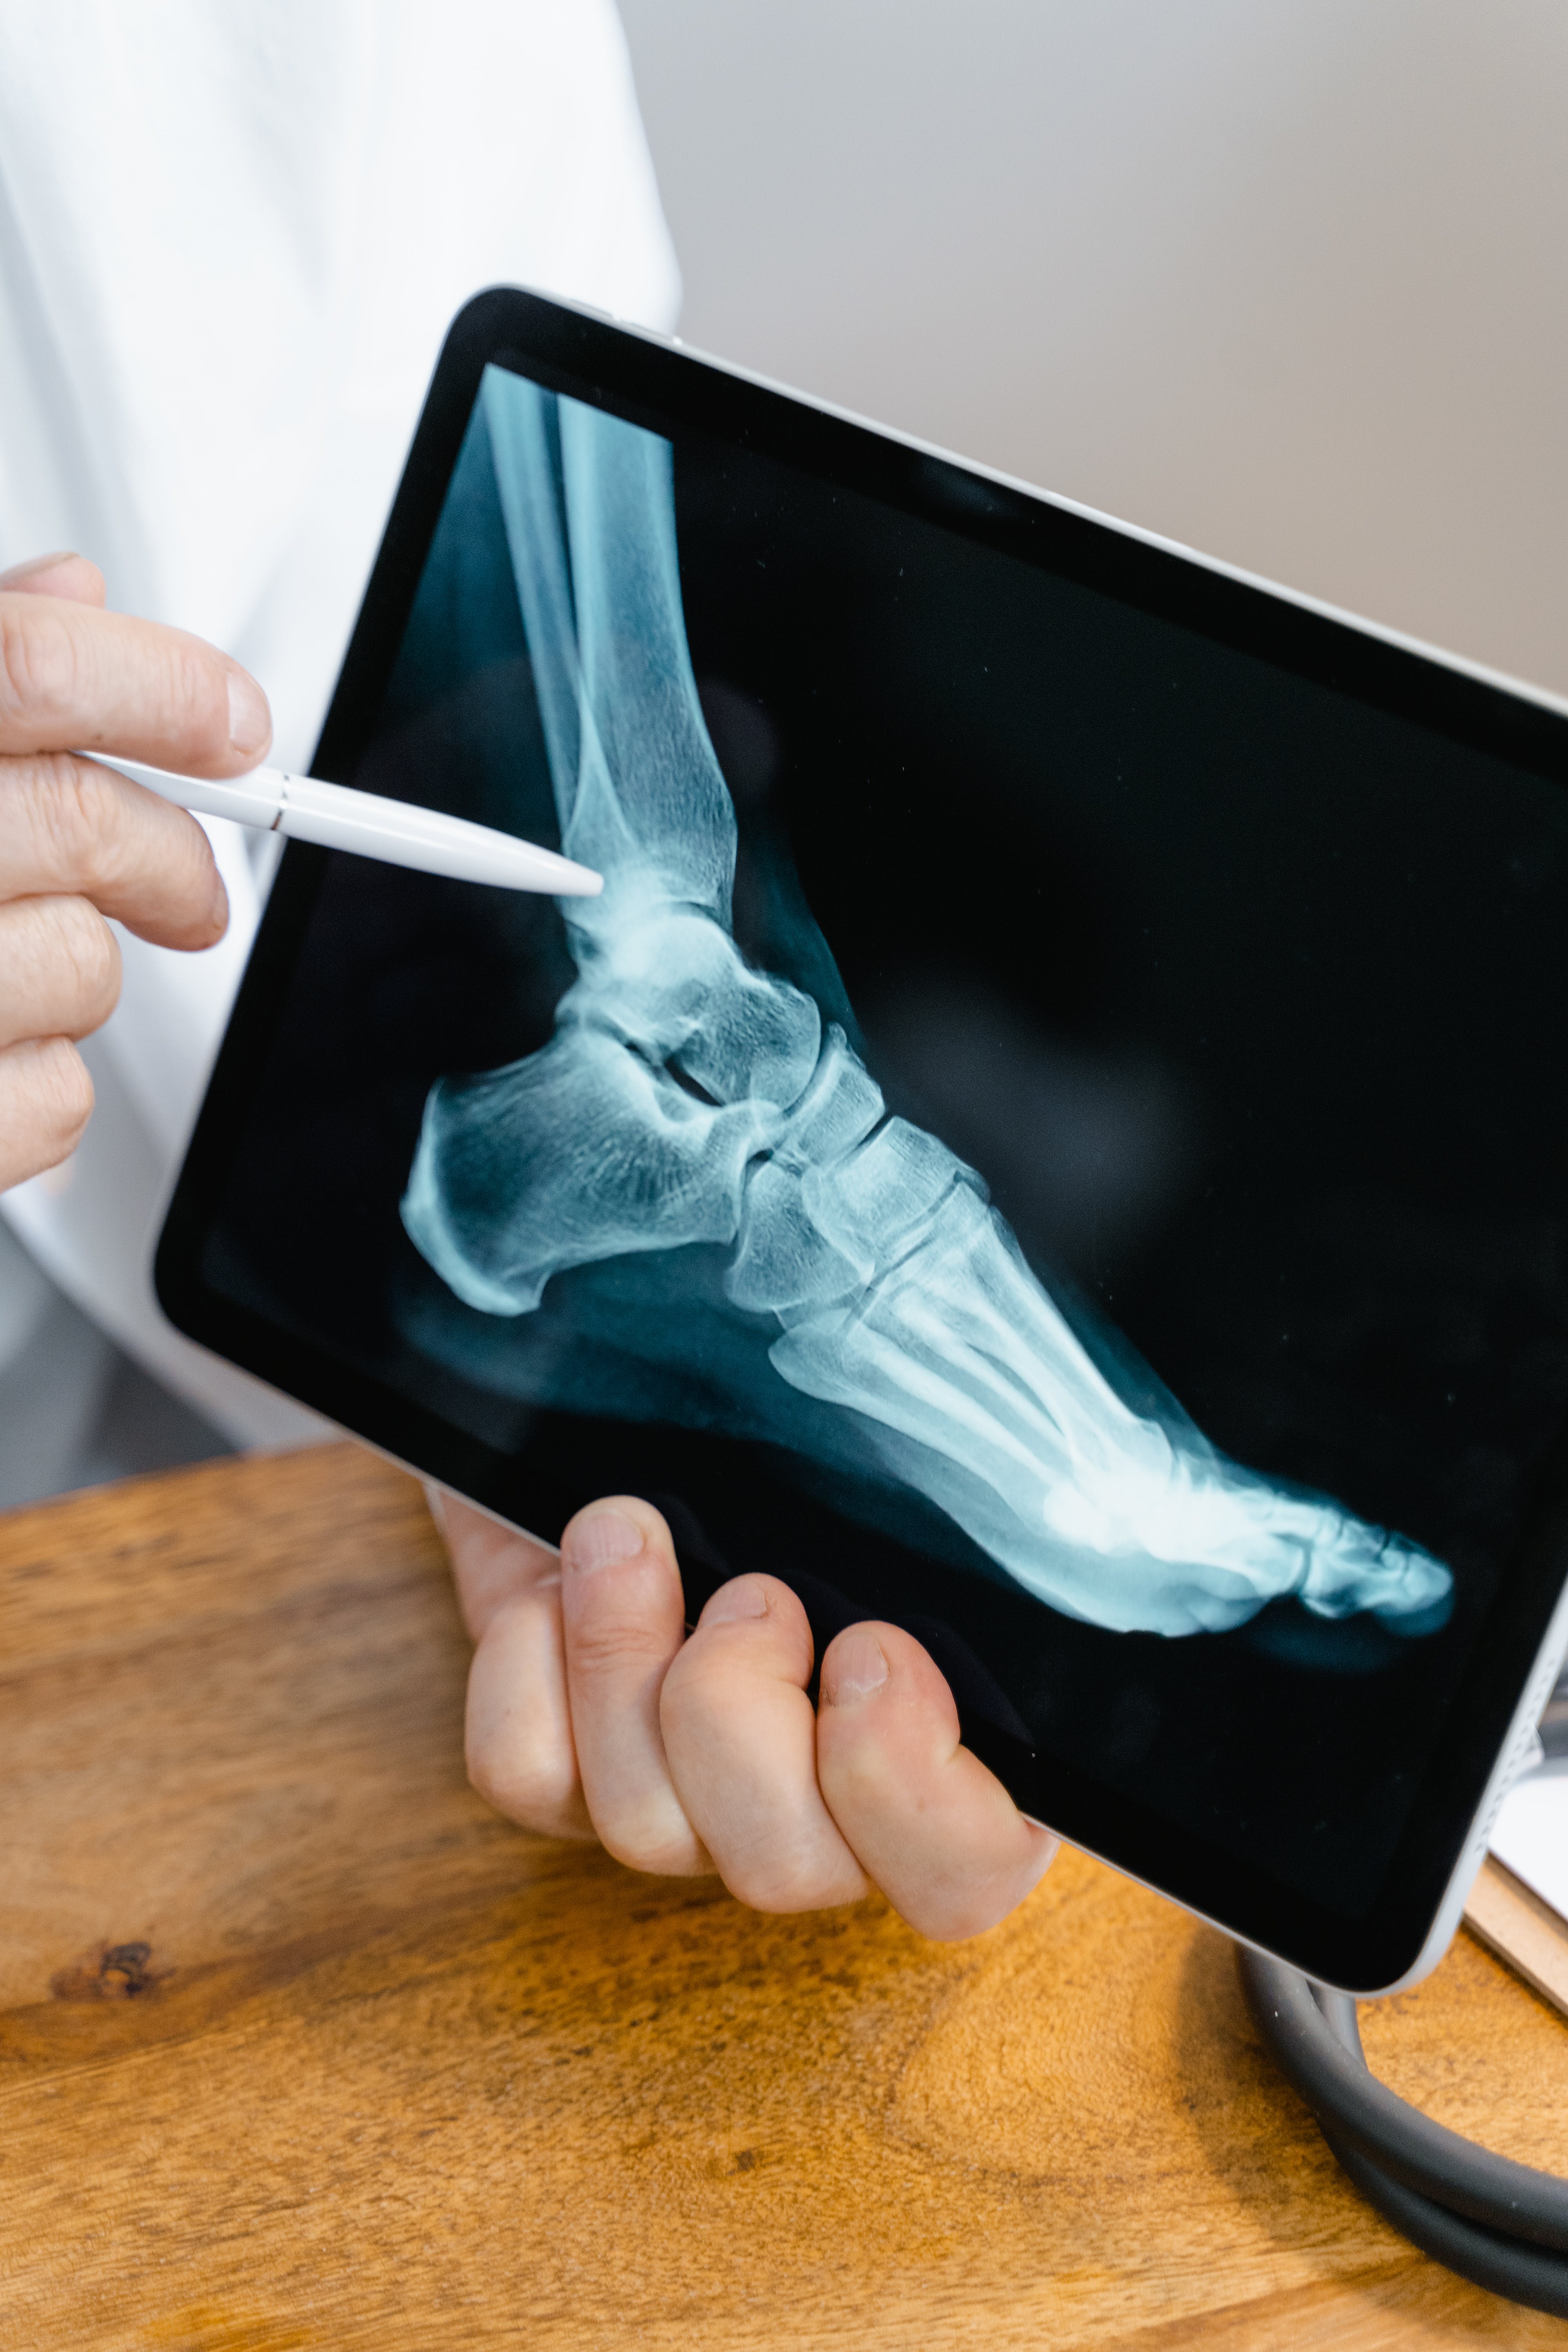 Lower leg fracture – accident at work